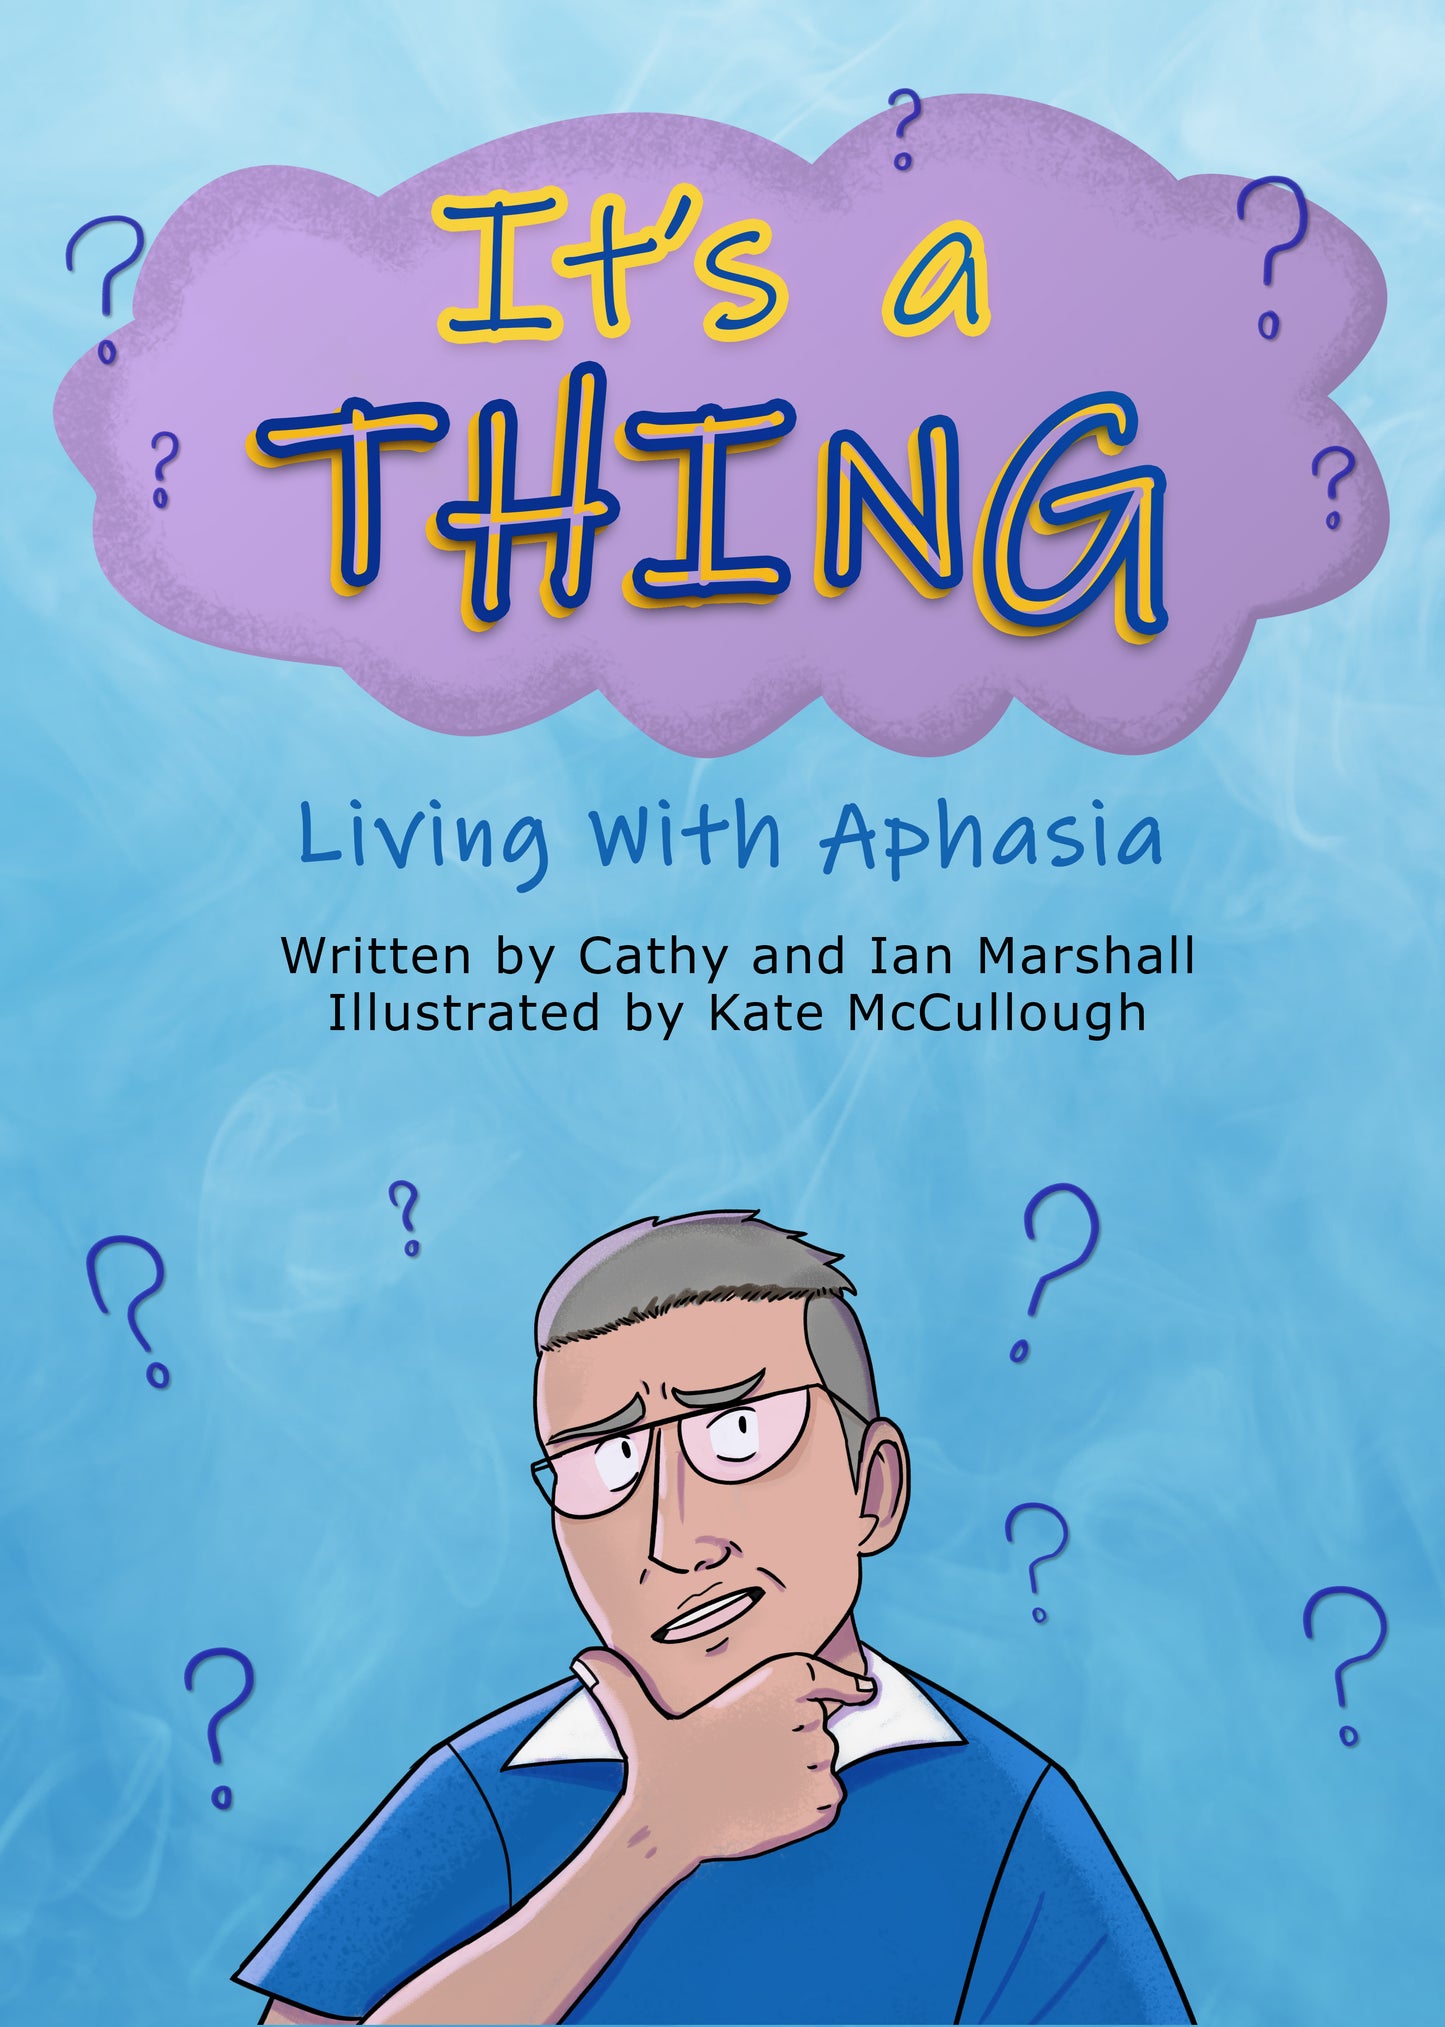 Front cover of illustrated book "It's A Thing!" by Ian and Cathy Marshall illustrated by Kate McCullough. Cover is blue with a purple cloud reading "It's a Thing" at the top in big friendly letters. The bottom half of the page shows an illustration of Ian looking puzzled.